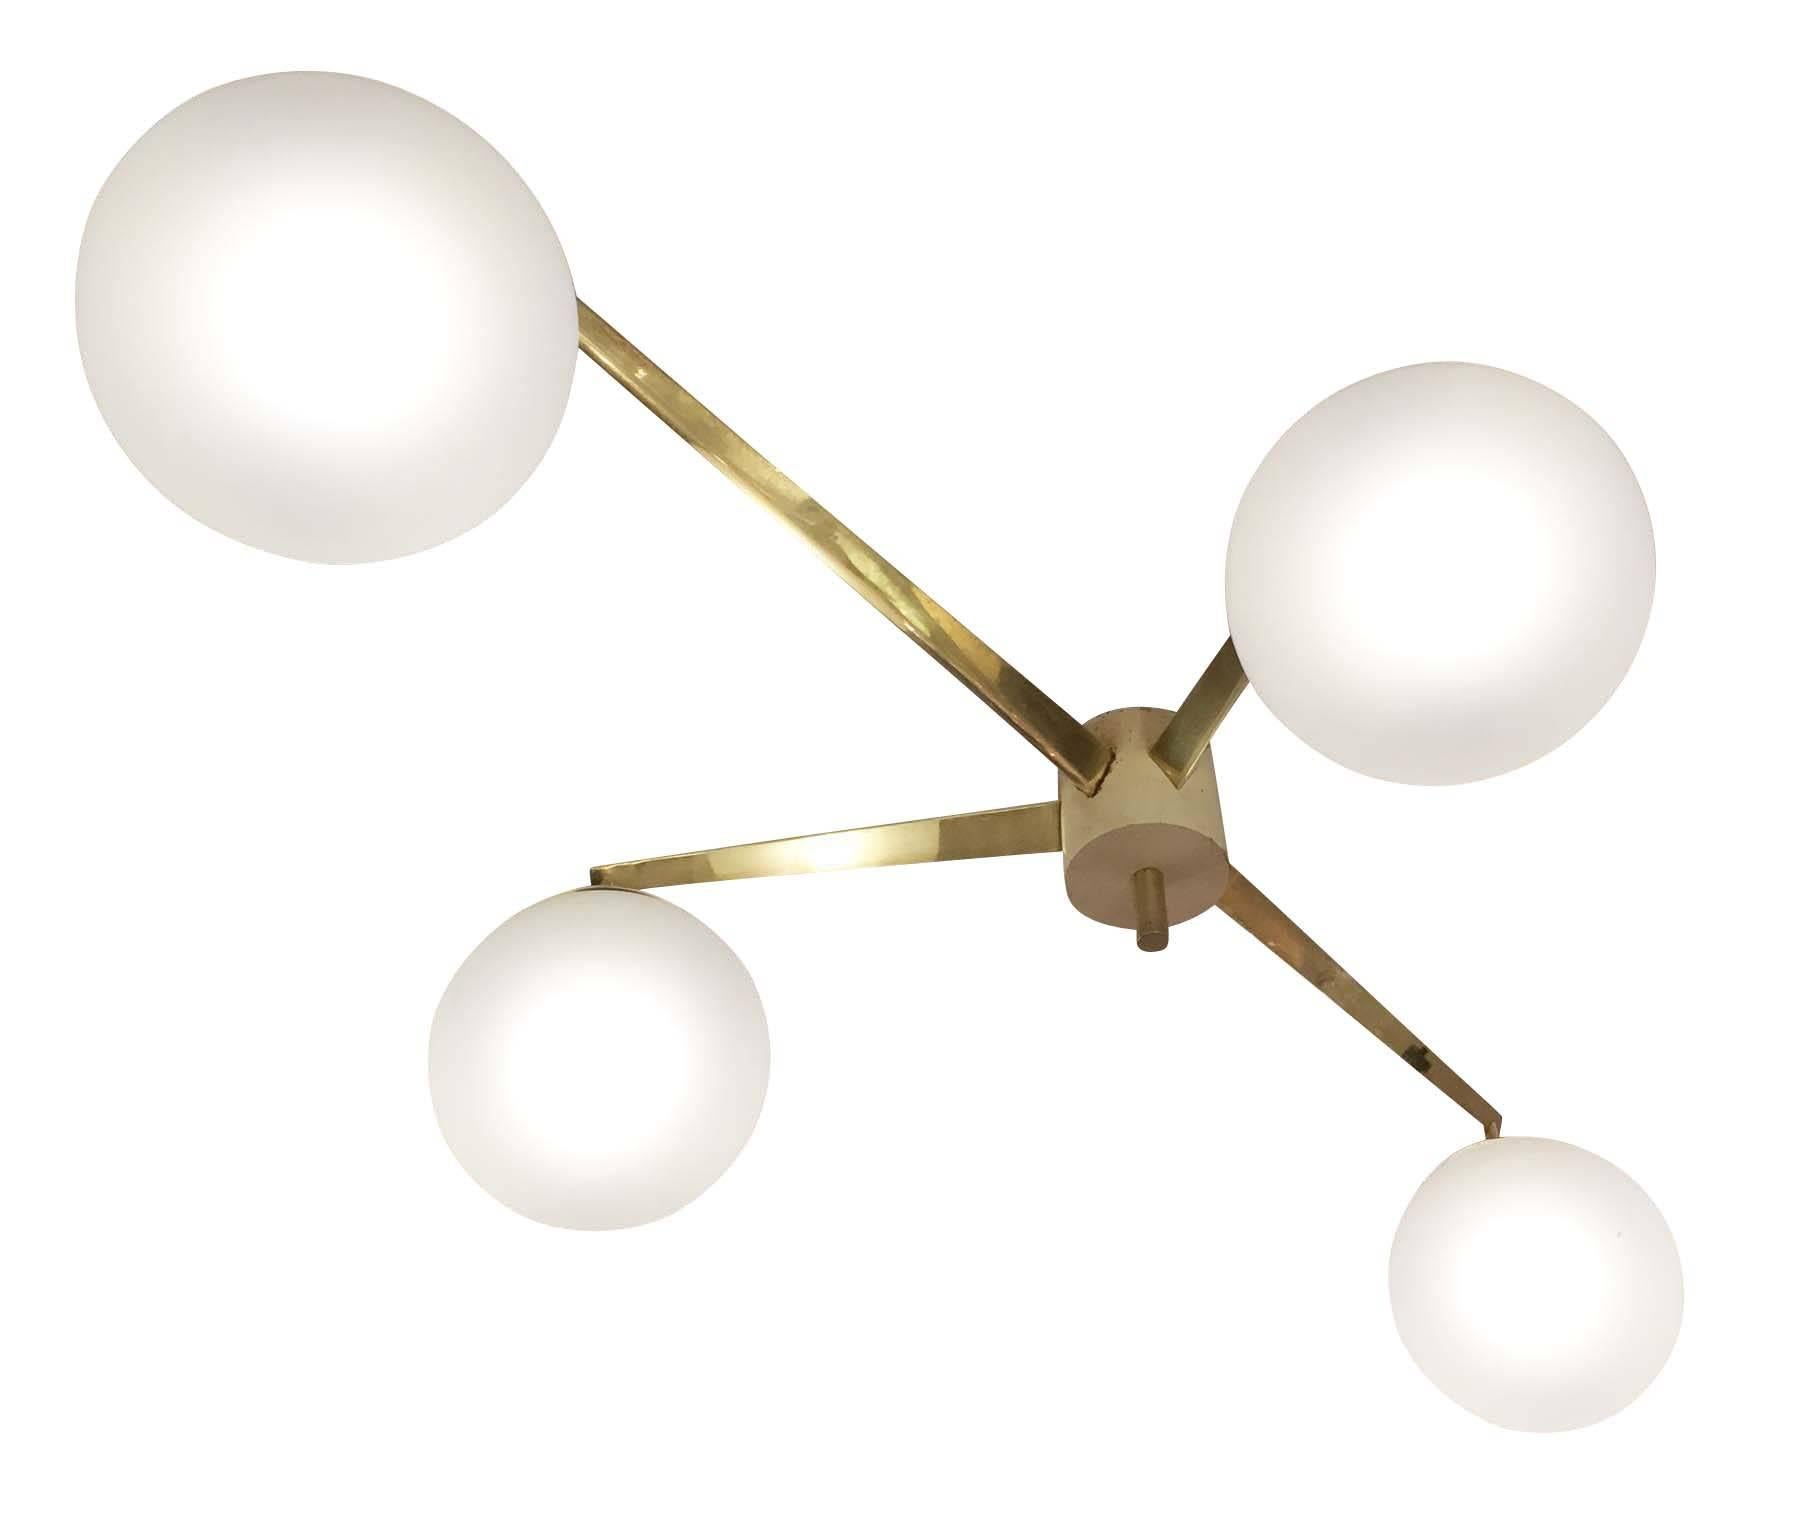 Magnificent rare chandelier designed by Angelo Lelli for Arredoluce in the 1950s. It features four satin globes on an aerodynamic brass frame. The arms are triangular in shape while the center body and globe holders are lacquered white. The original